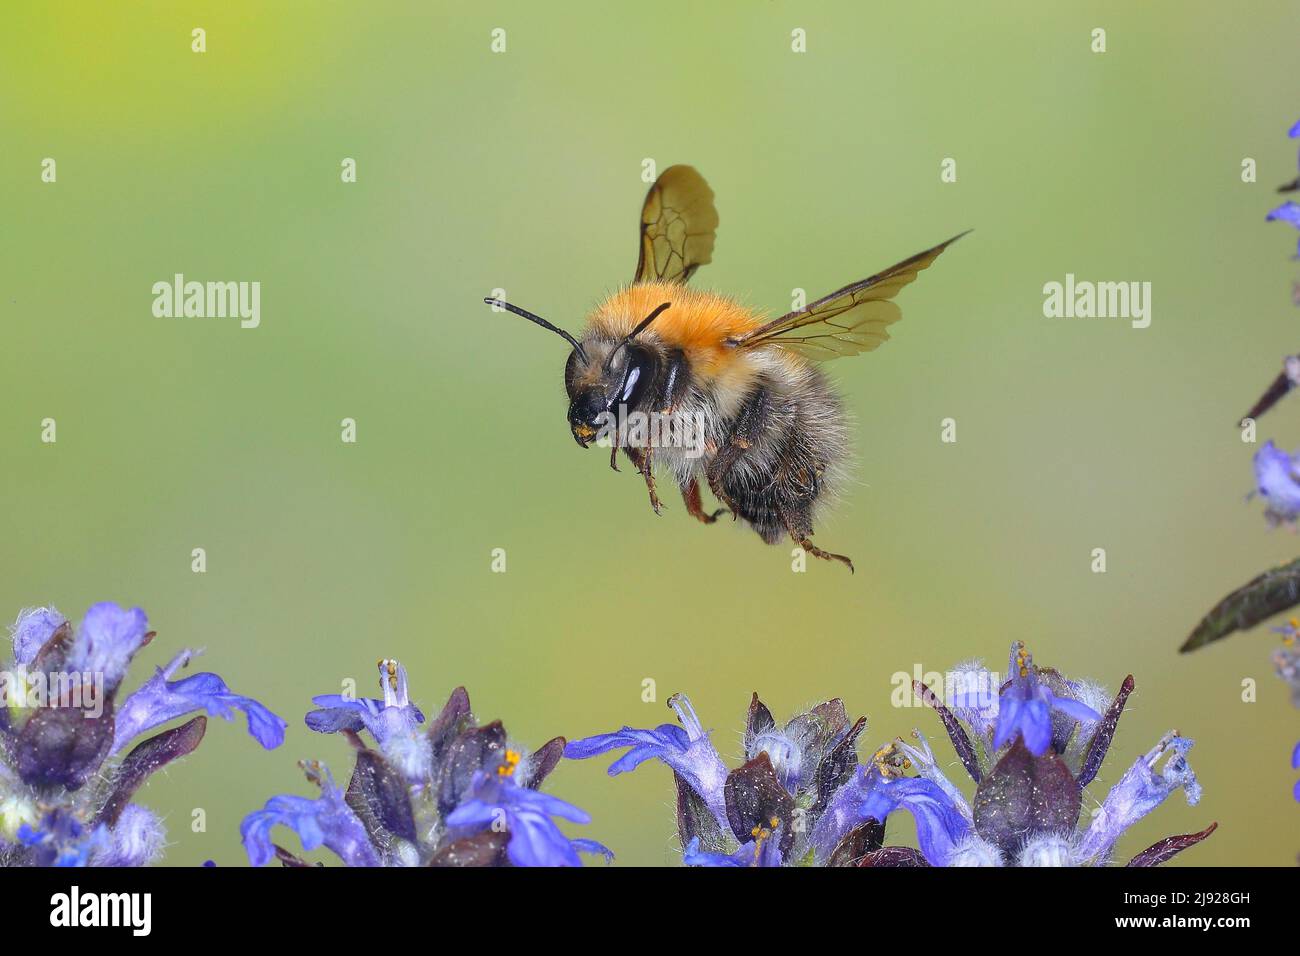 Common carder-bee (Bombus pascuorum), in flight, highspeed nature photo, over creeping blue bugle (Ajuga reptans), Siegerland, North Stock Photo